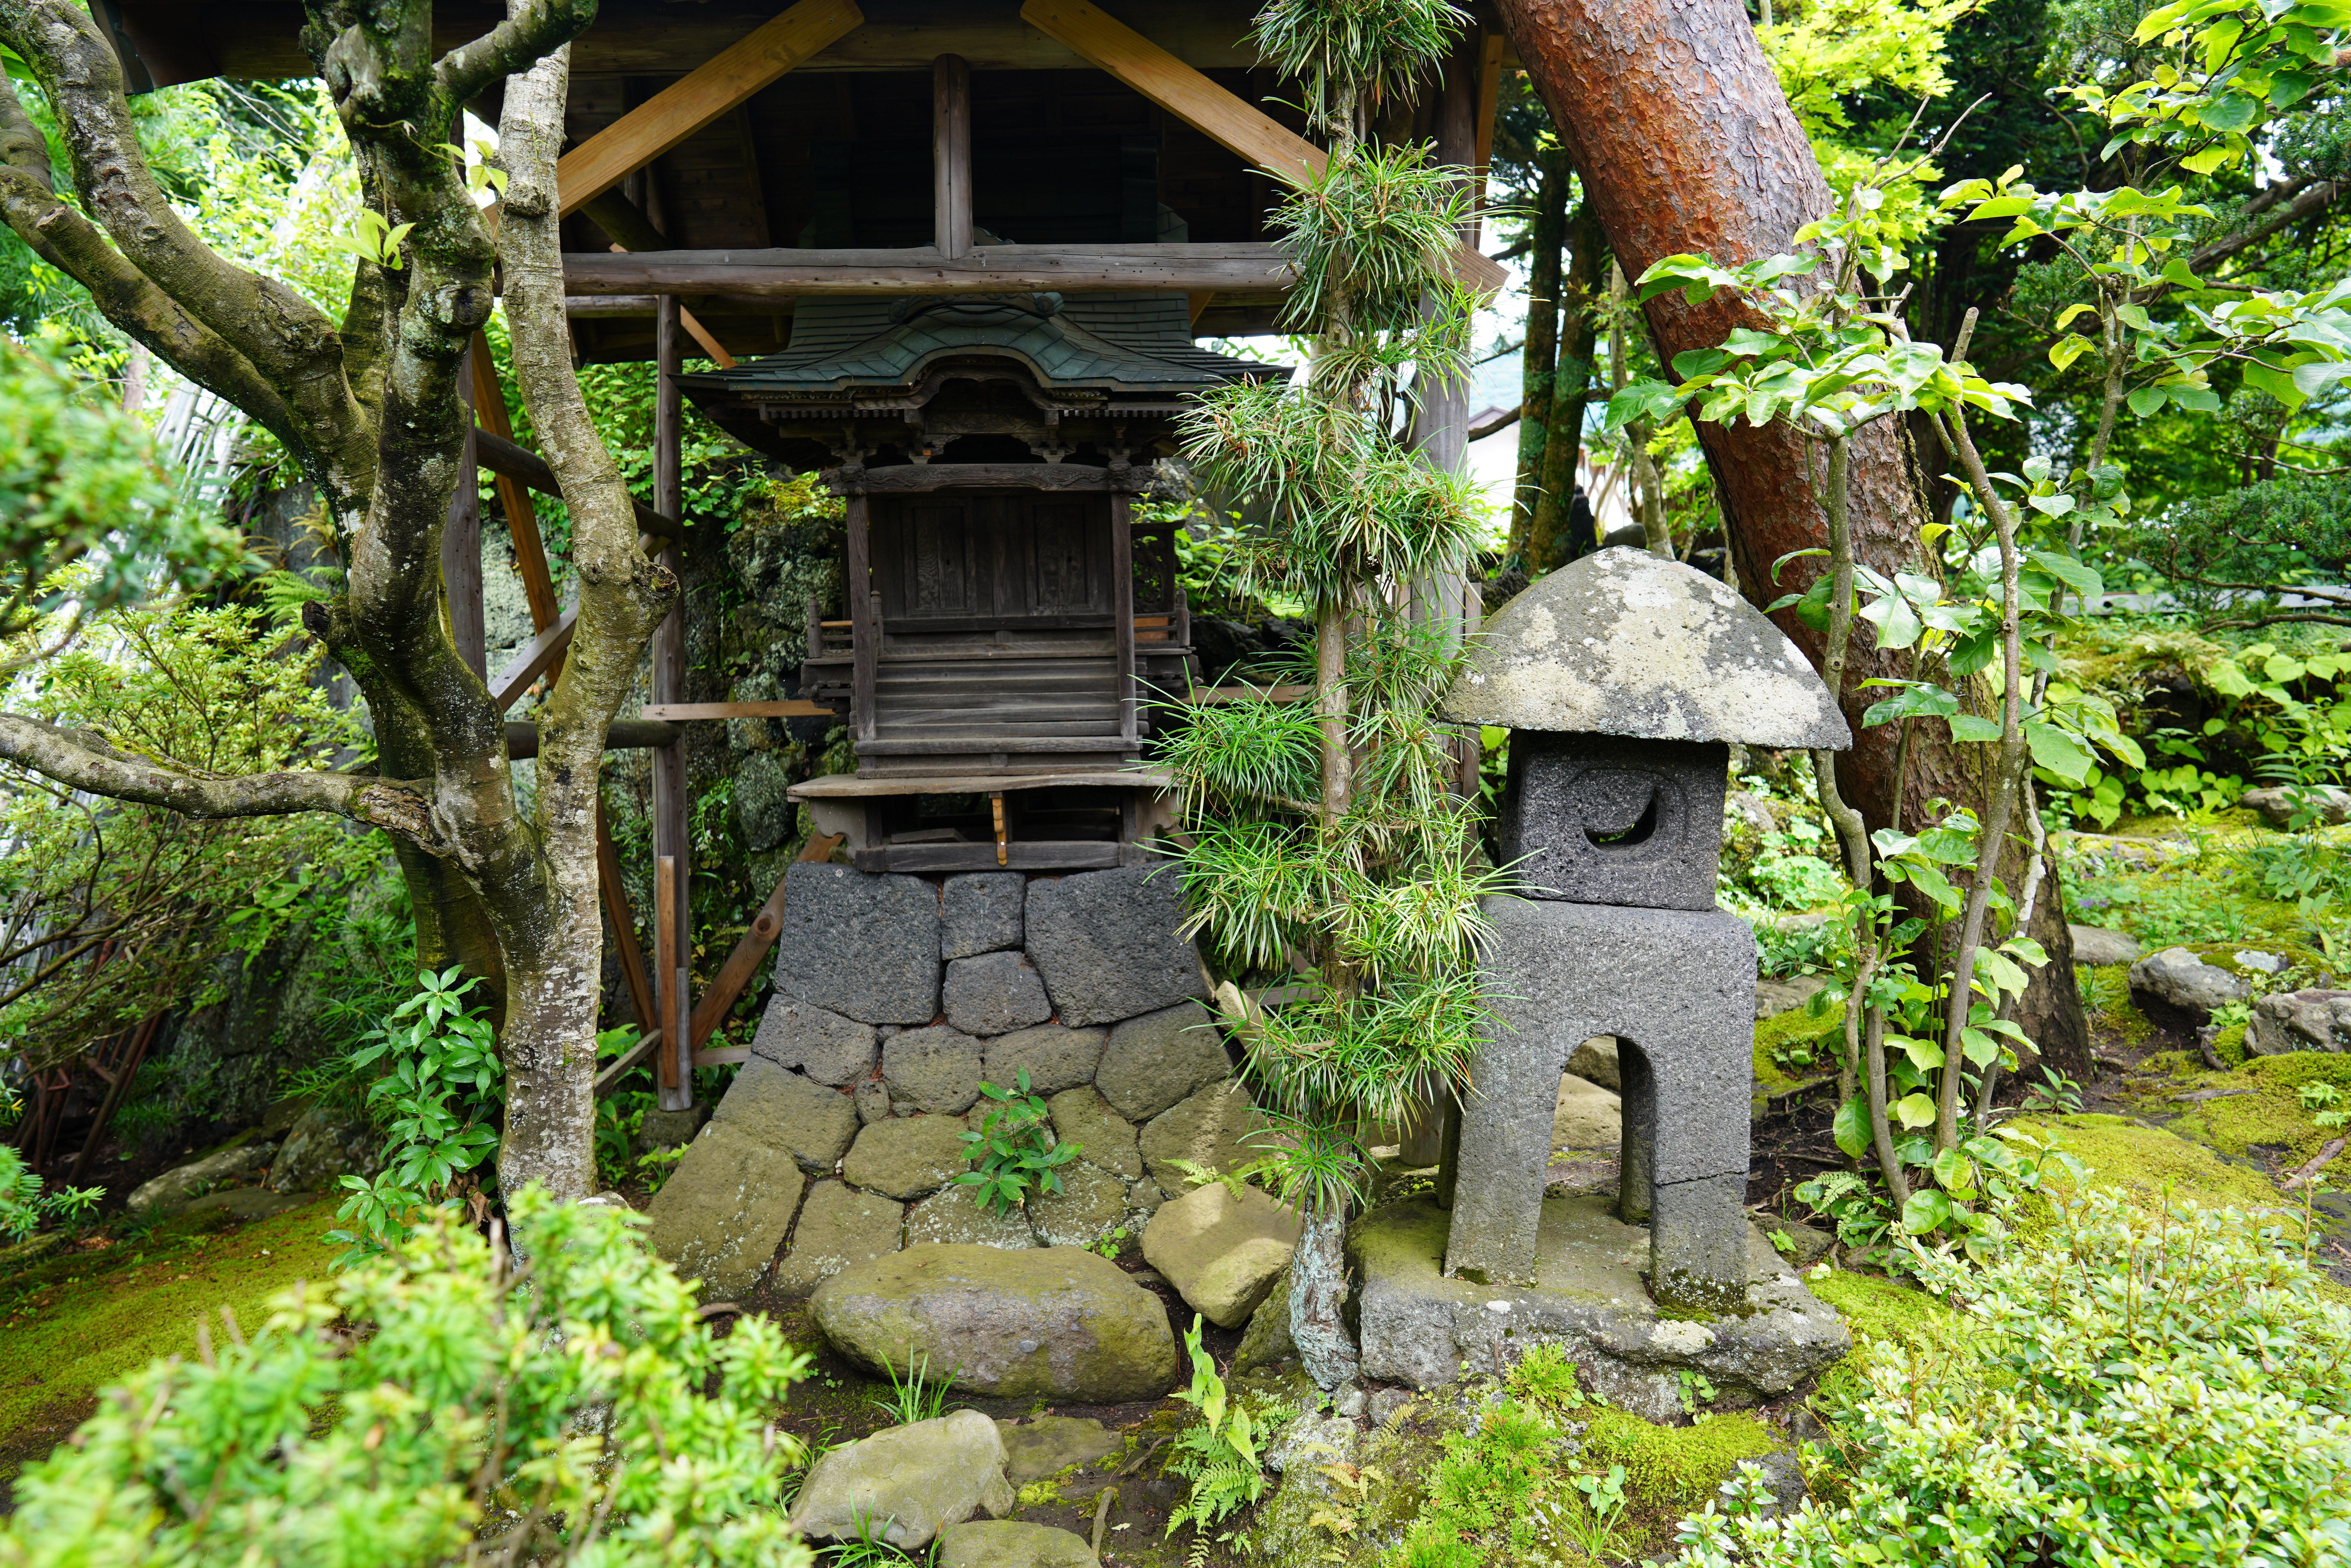 The miniature shrine, whose base is made of volcanic stones, is part of Ide Jyozoten's 300-year-old garden.